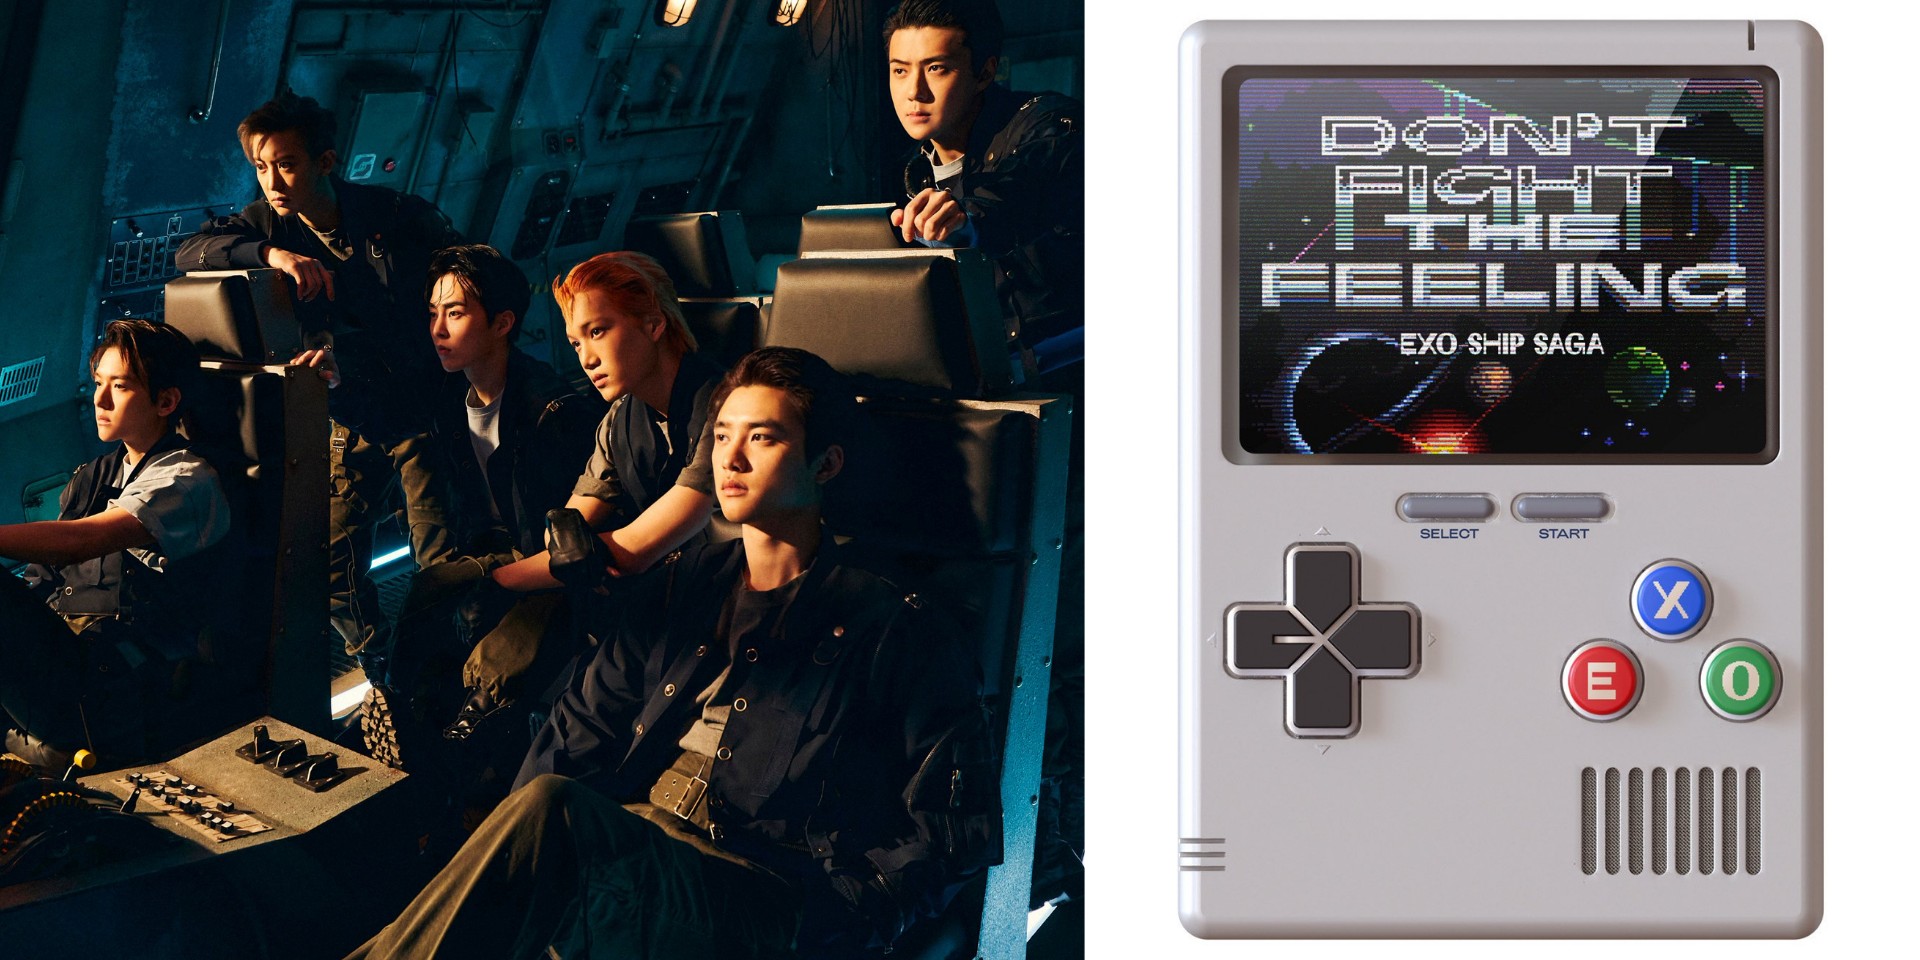 EXO launch new mini-game to celebrate upcoming album 'DON'T FIGHT THE FEELING'